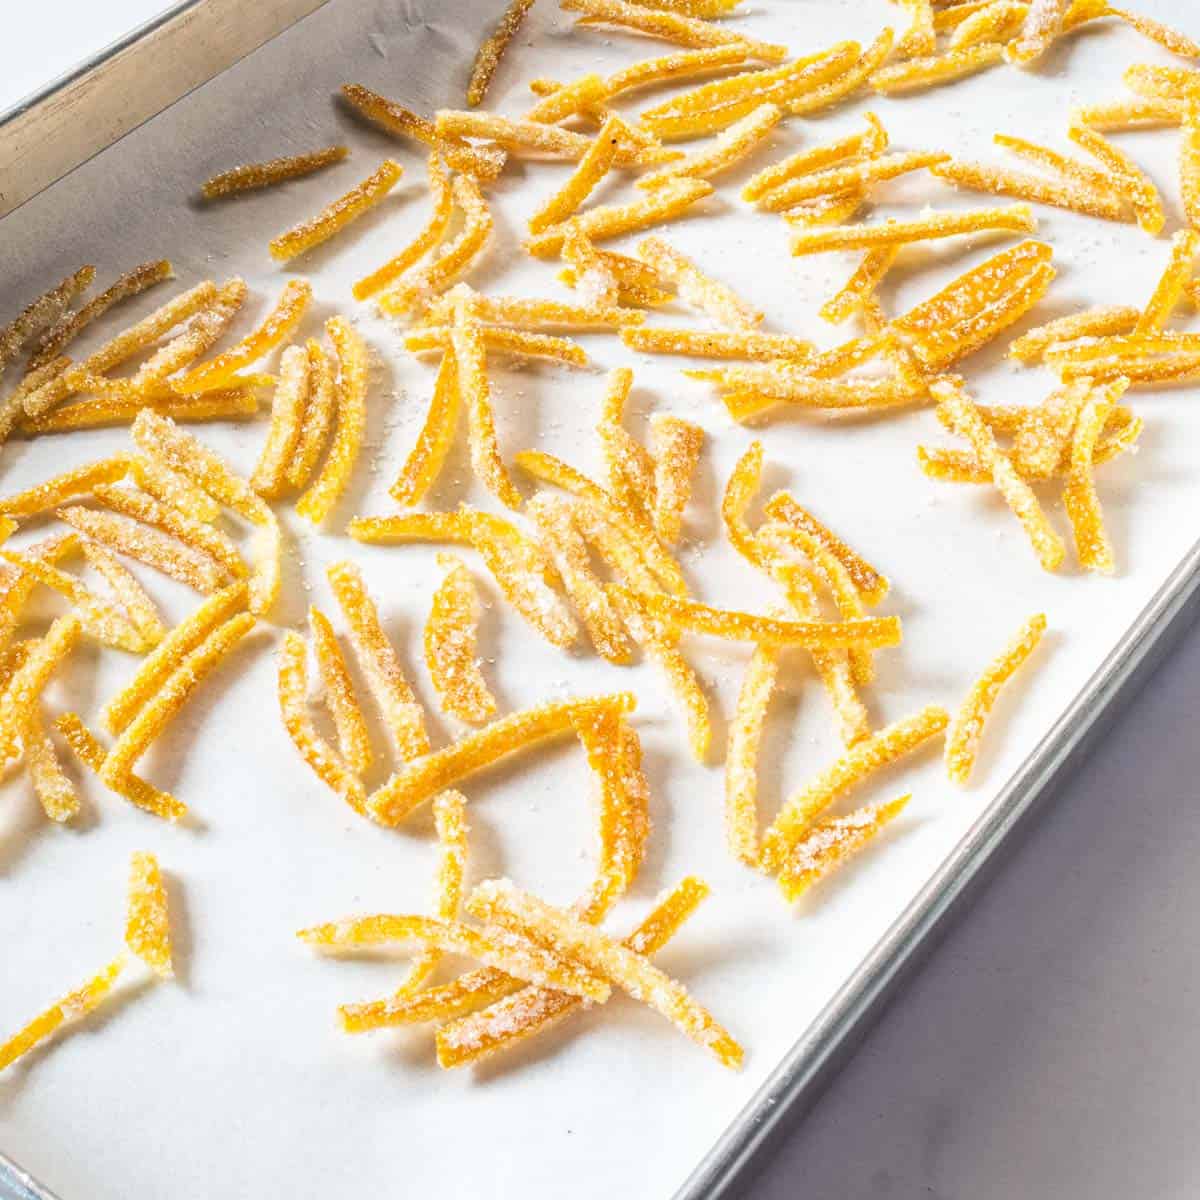 Orange peel candy on a parchment lined rectangle tray